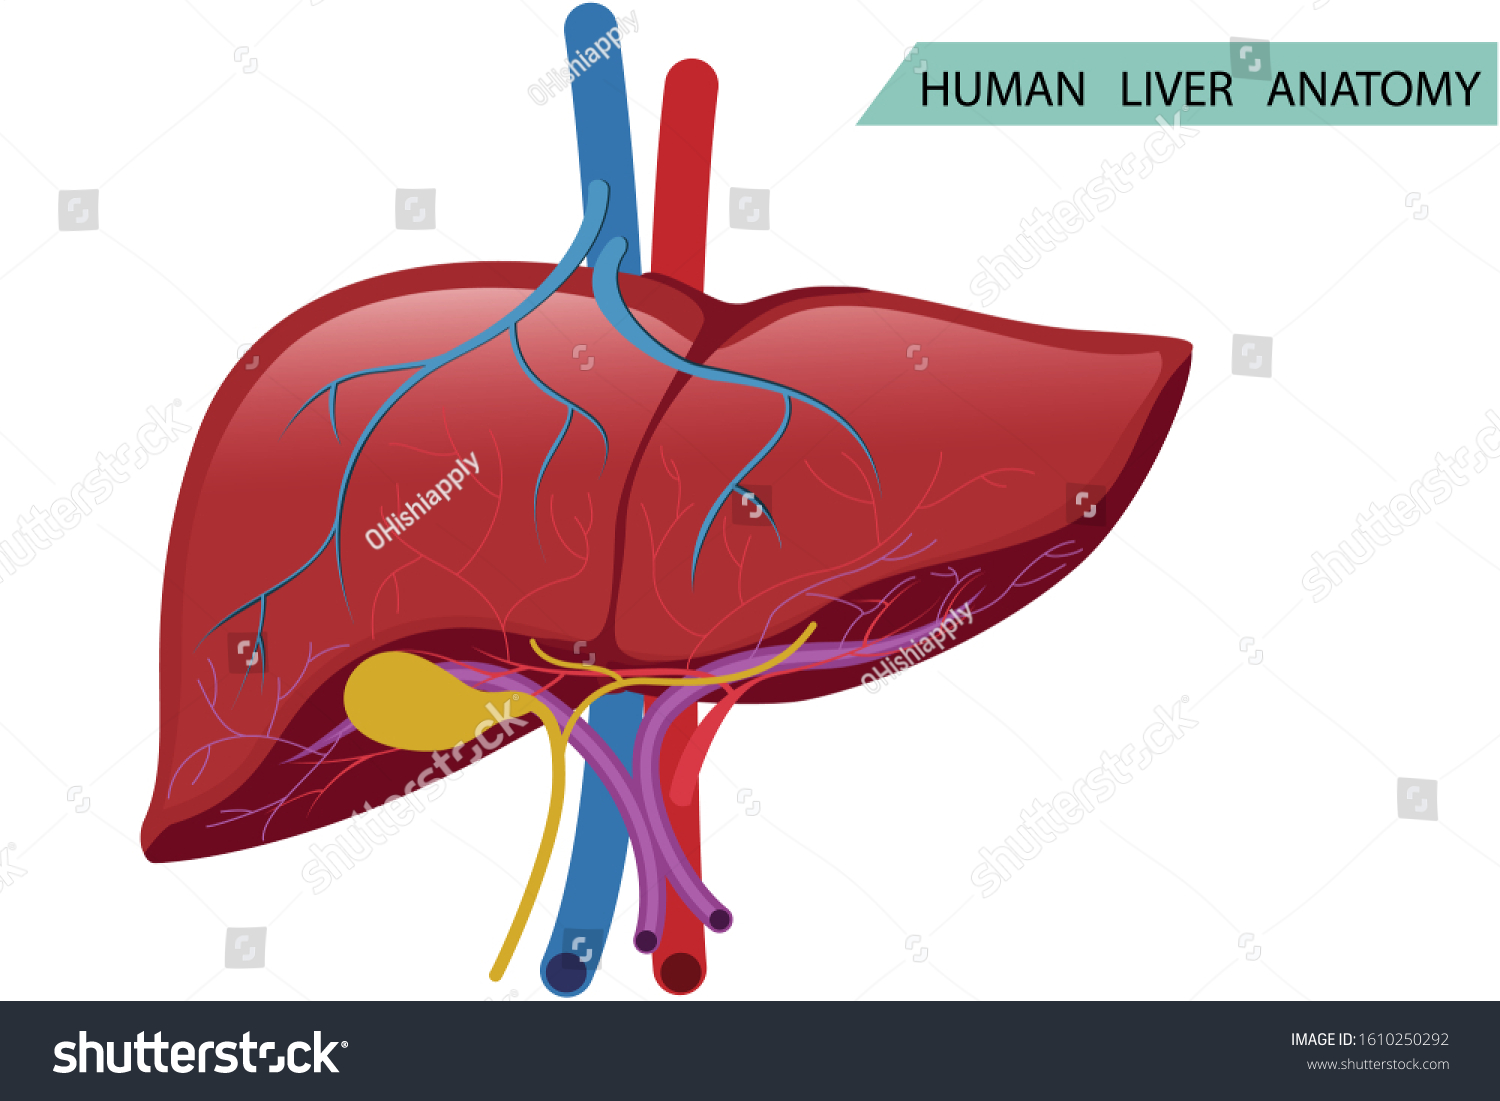 Anatomy Human Liver Structure Vector Health Stock Vector (Royalty Free ...